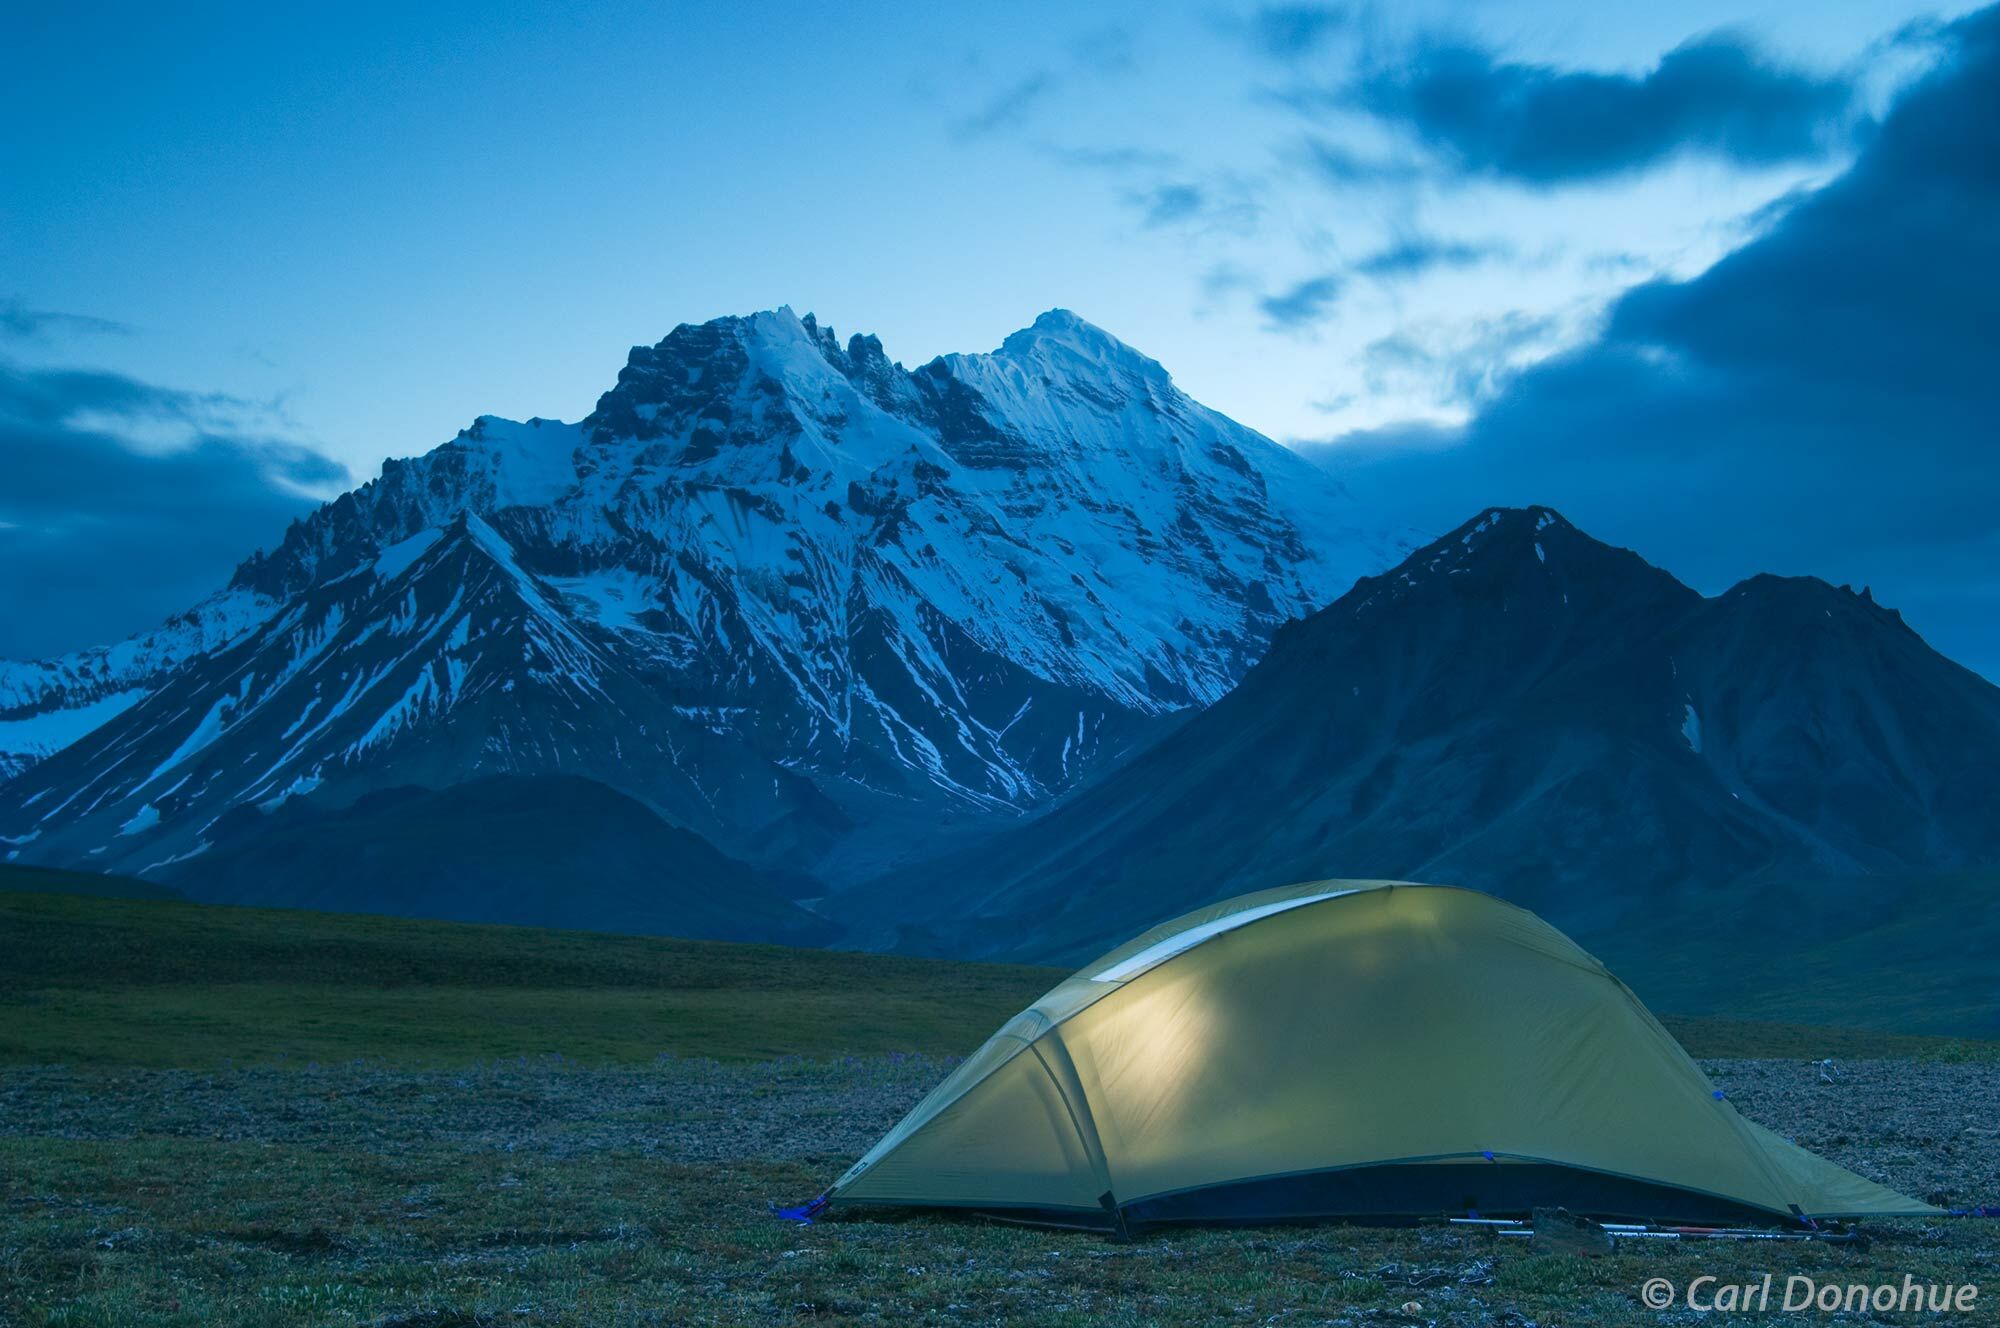 Camping on the Sanford Plateau after dark, with a view of Mt Drum. Wrangell-St. Elias National Park, Alaska.